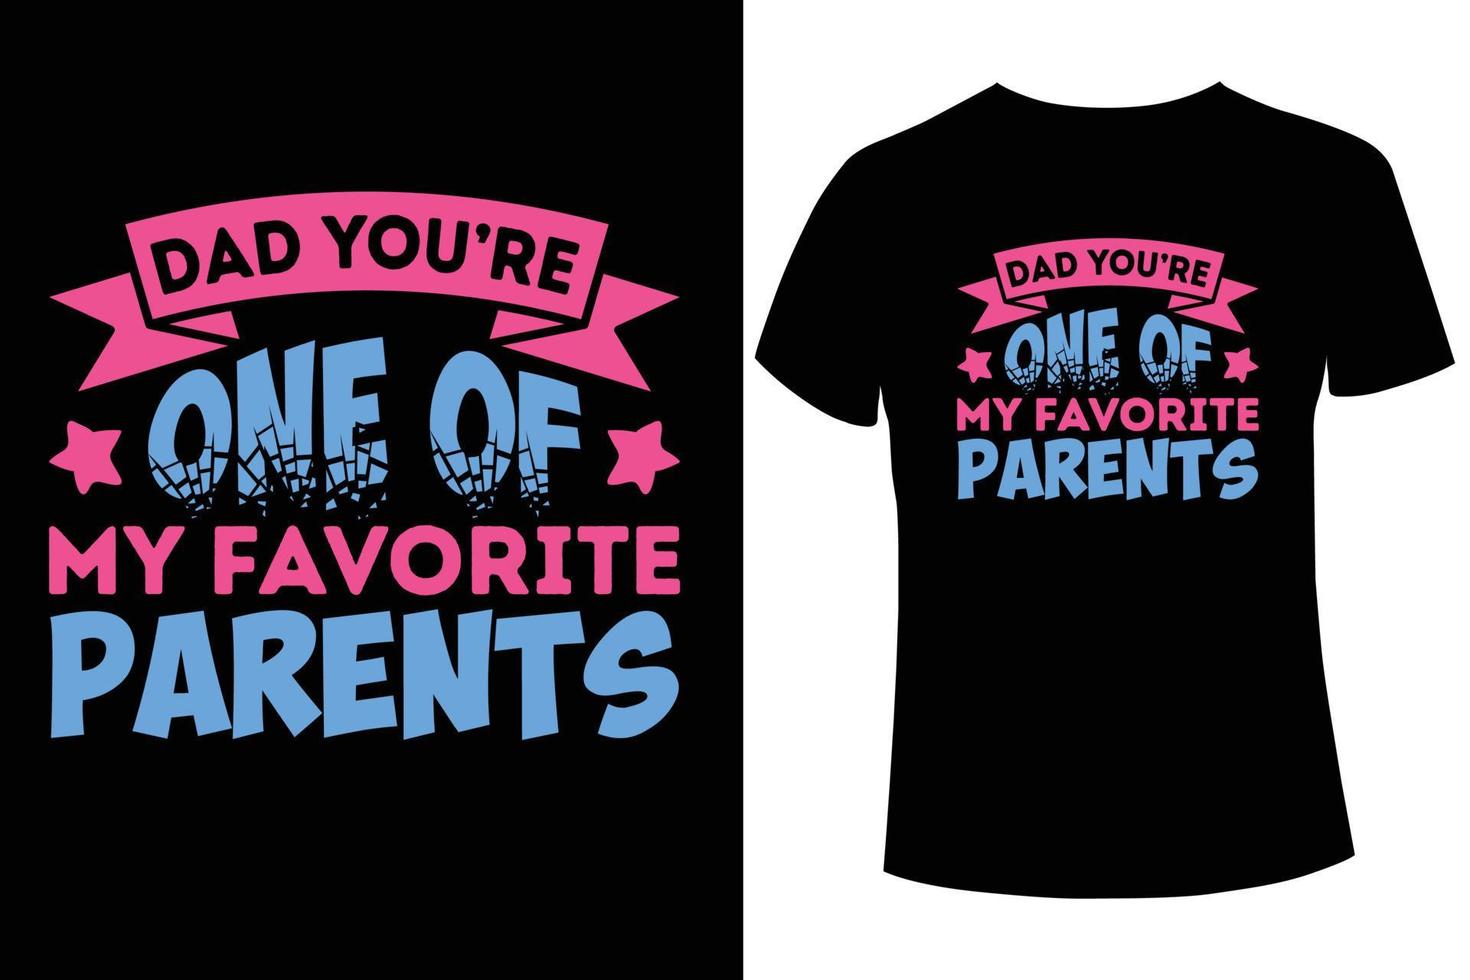 Dad you're one of  my favorite parents t-shirt design template vector